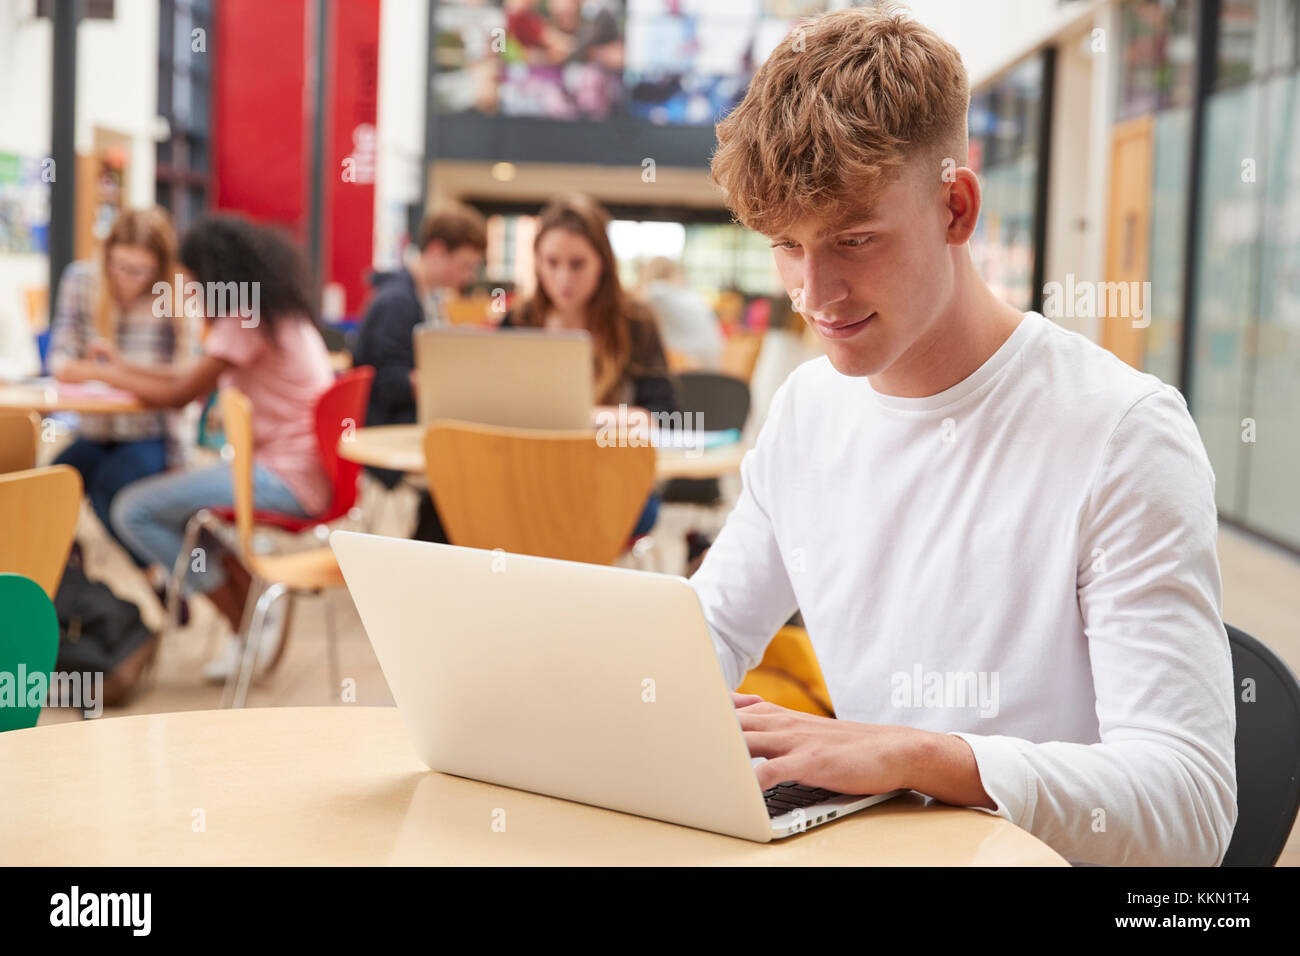 Male Student Working In Communal Area Of Busy College Campus Stock Photo